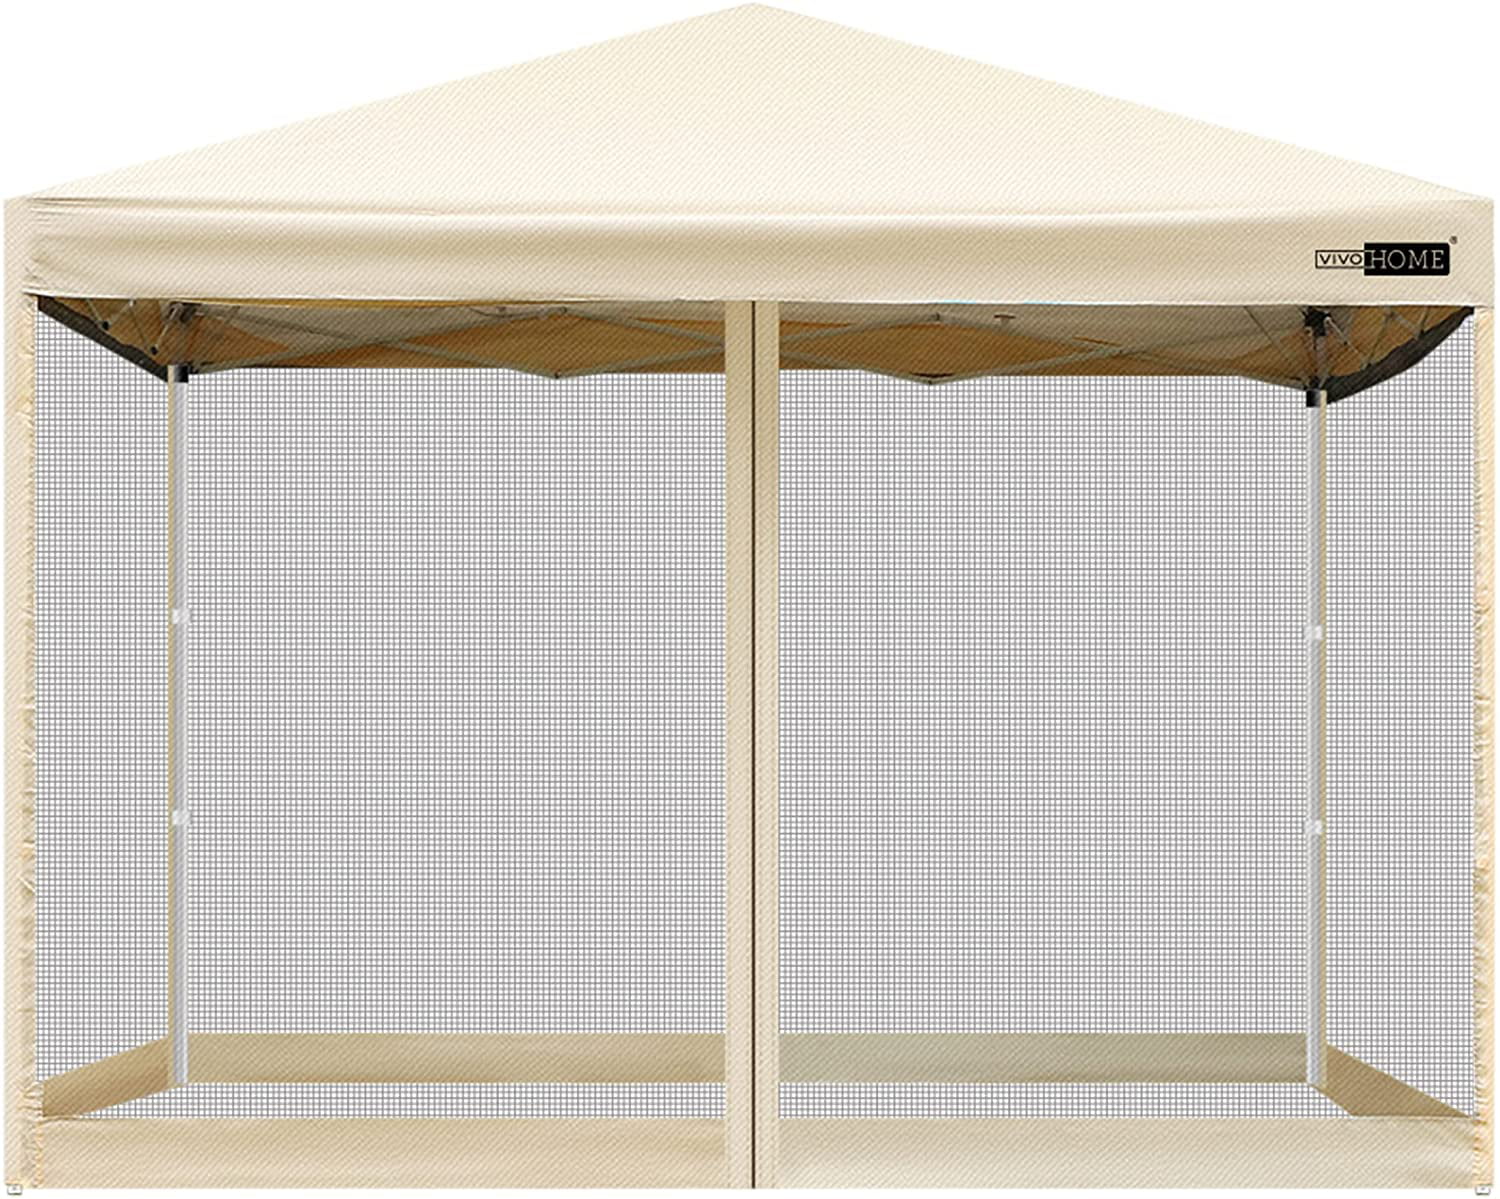 VIVOHOME 210D Oxford Outdoor Easy Pop Up Canopy Screen Party Tent with Mesh Side Walls (8 x 8 FT, Beige)